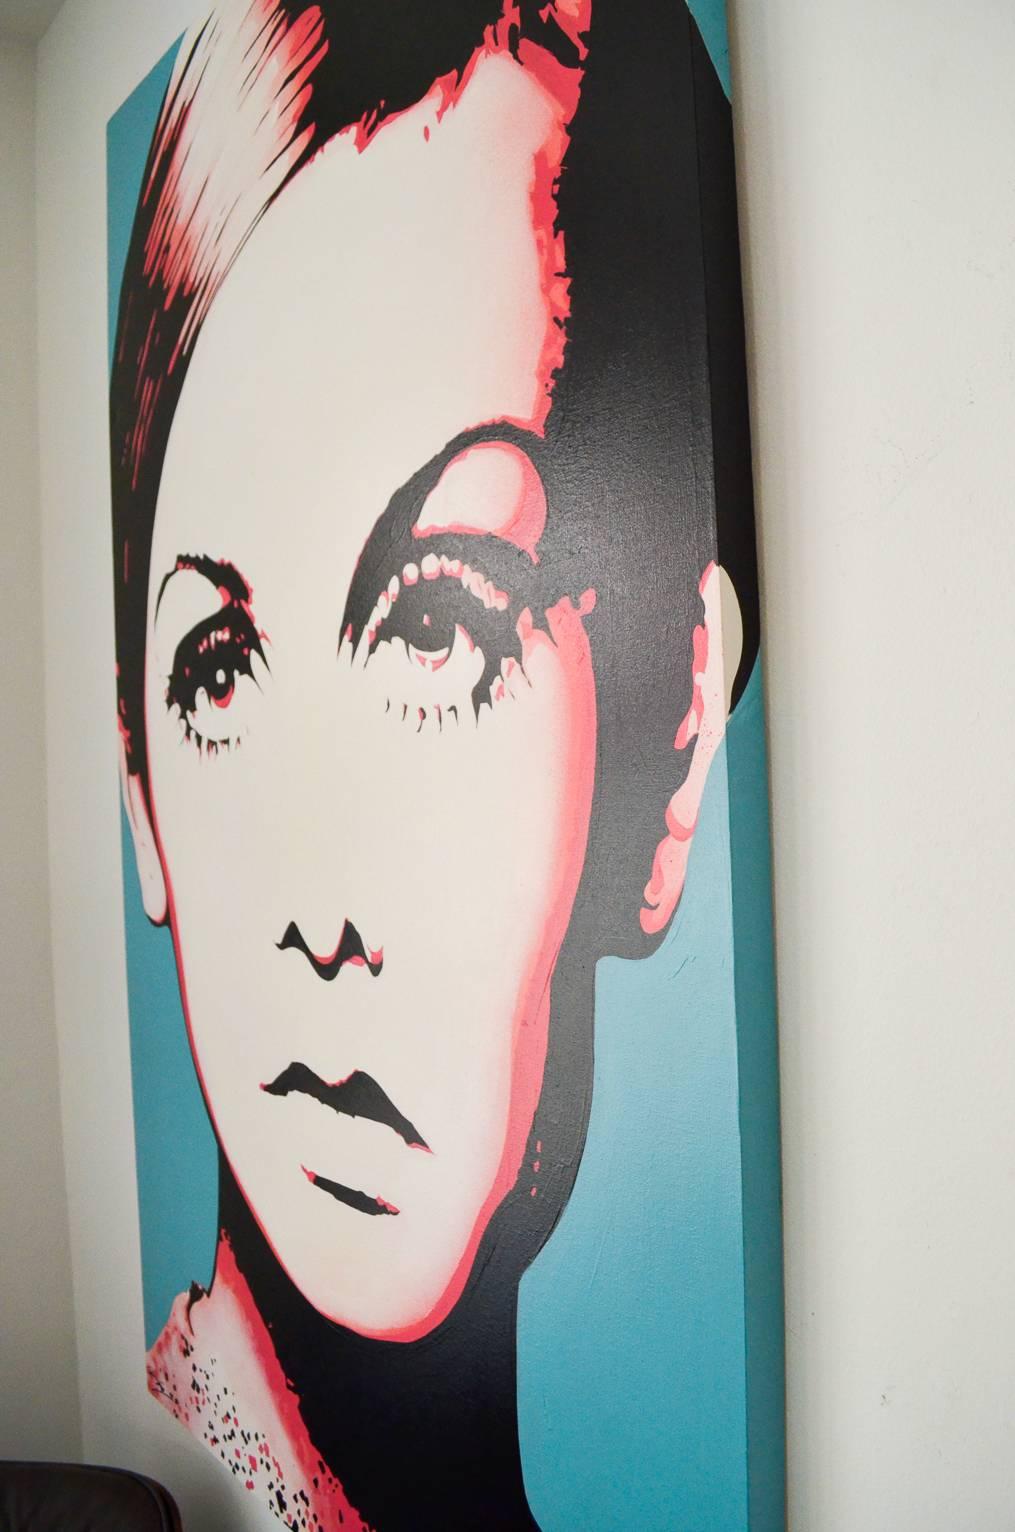 Beautiful custom oil on canvas of 1960s supermodel Twiggy. Stretched canvas on wood frame, excellent condition. Signed. Amazing pop art for your home. 

Large, measures 60" L x 36" W.